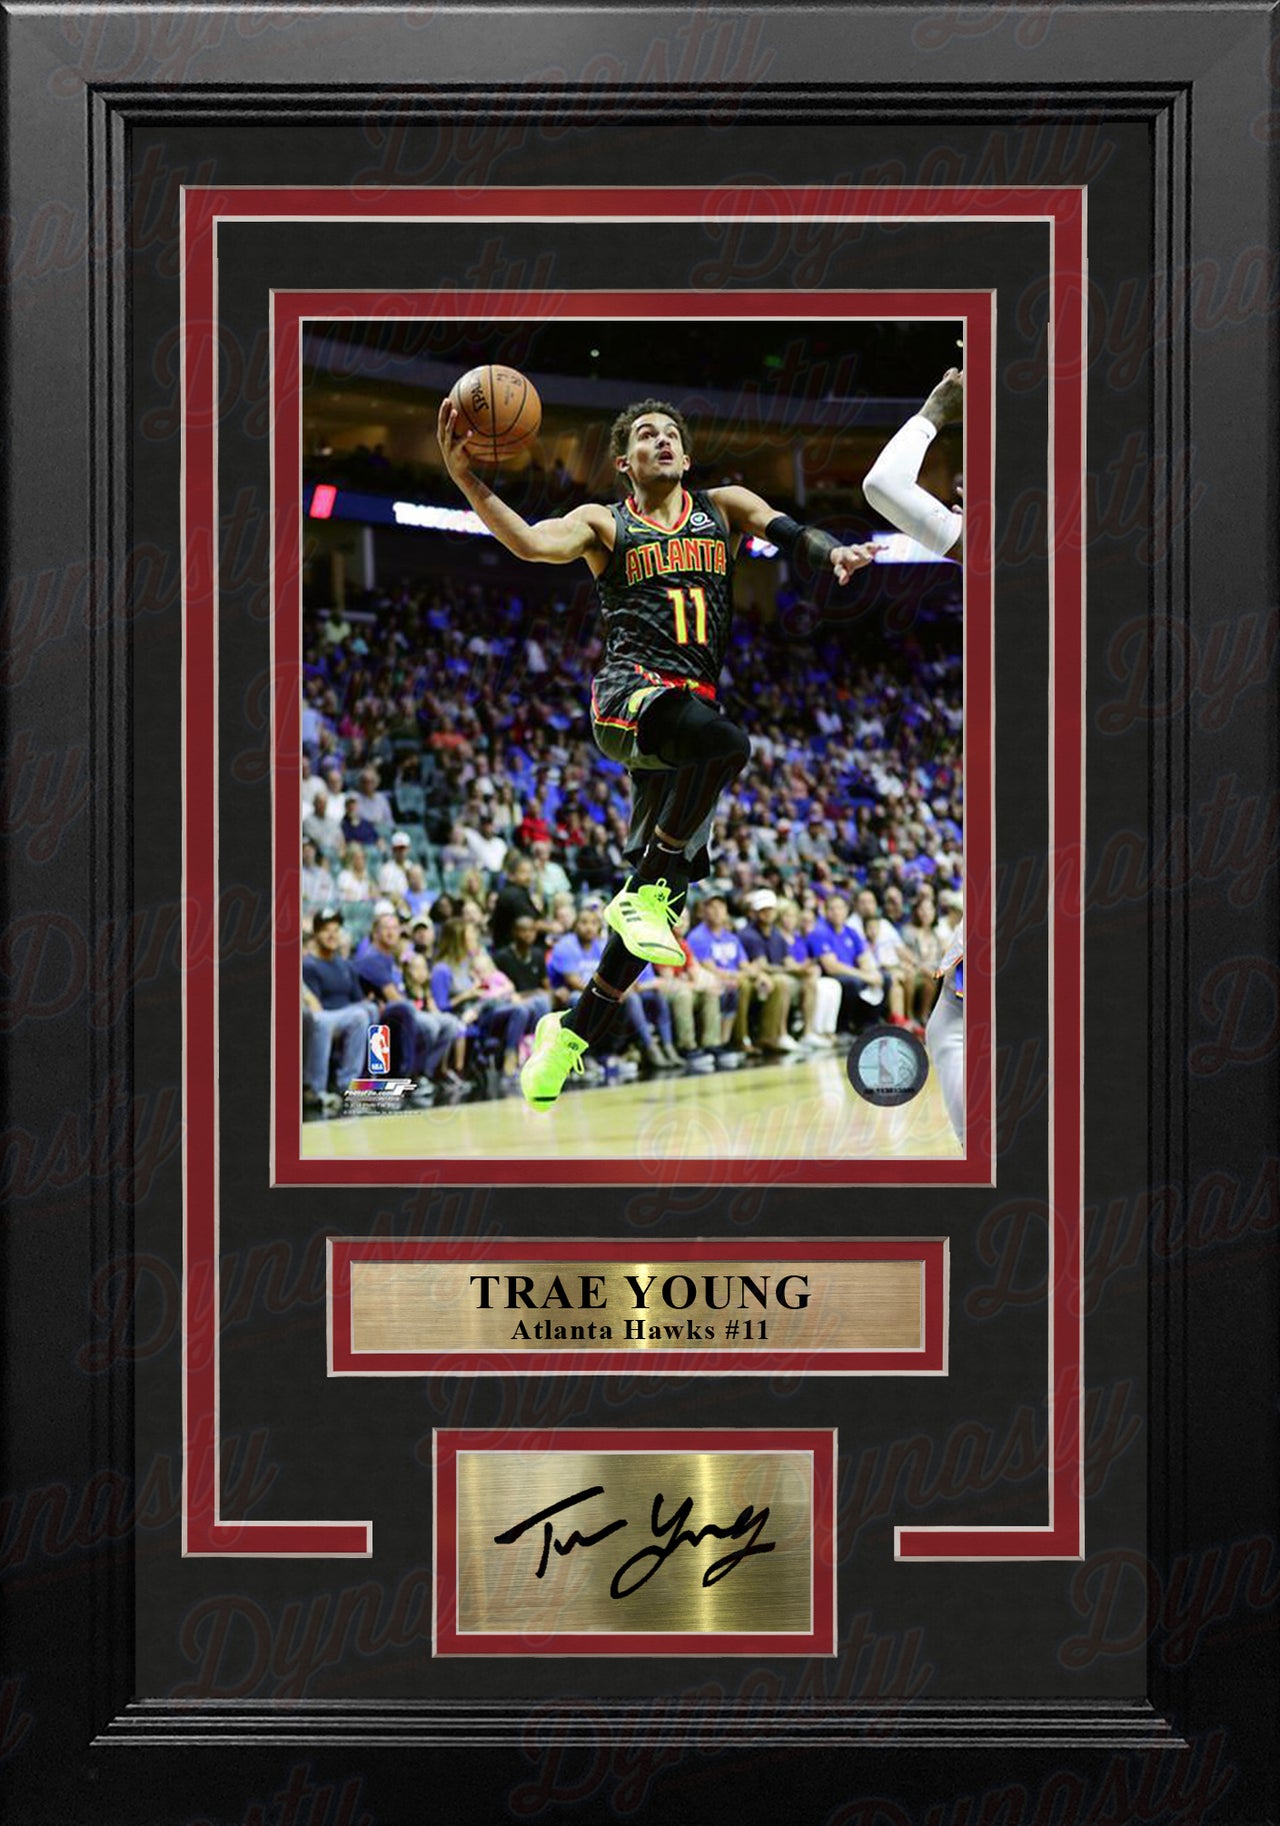 Trae Young in Action Atlanta Hawks Framed Basketball Photo with Engraved Autograph - Dynasty Sports & Framing 